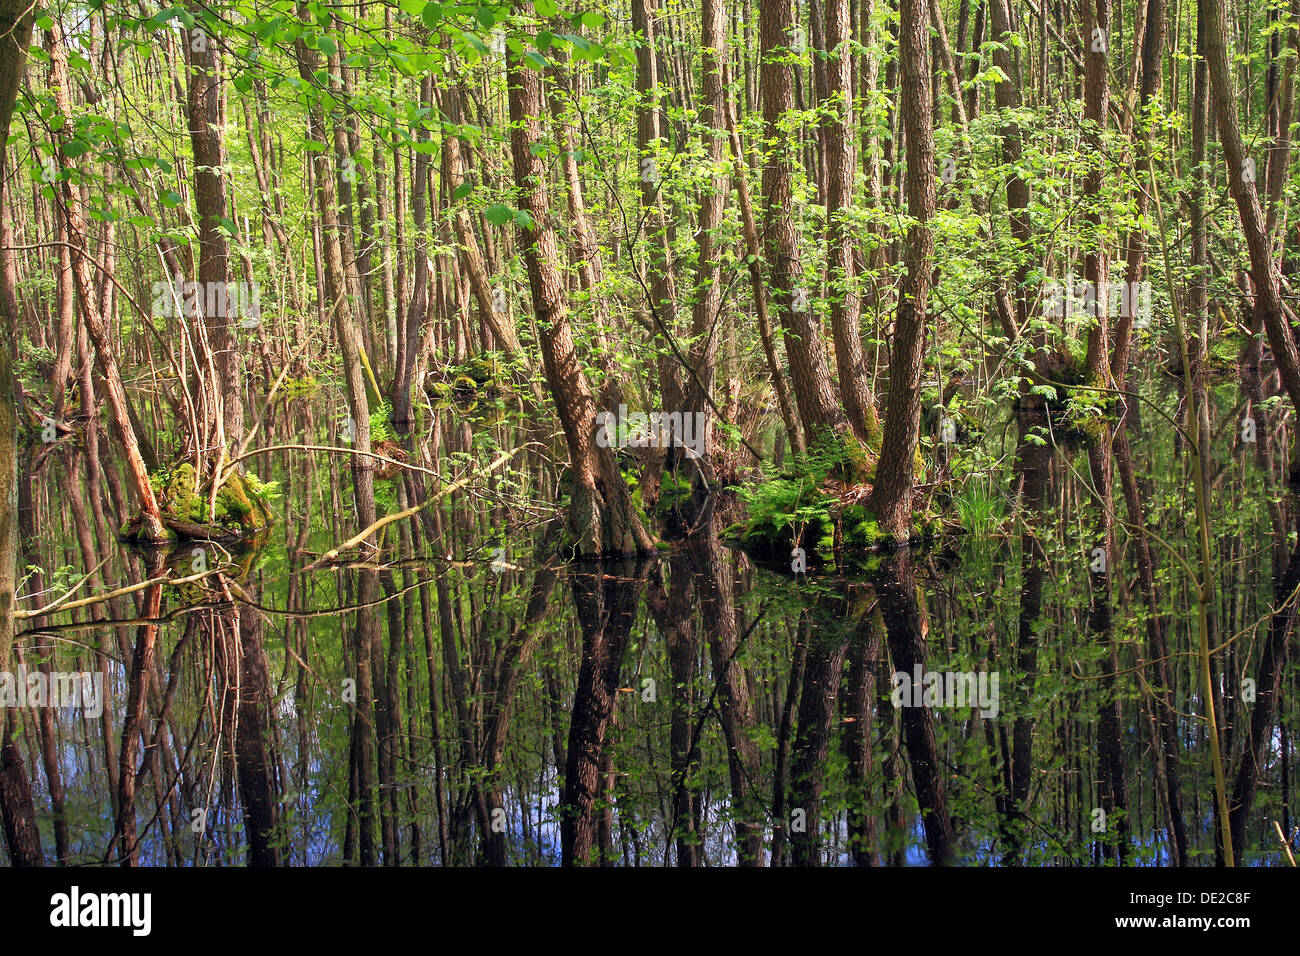 Carr or swamp forest with standing water in spring, Mecklenburg-Western Pomerania Stock Photo